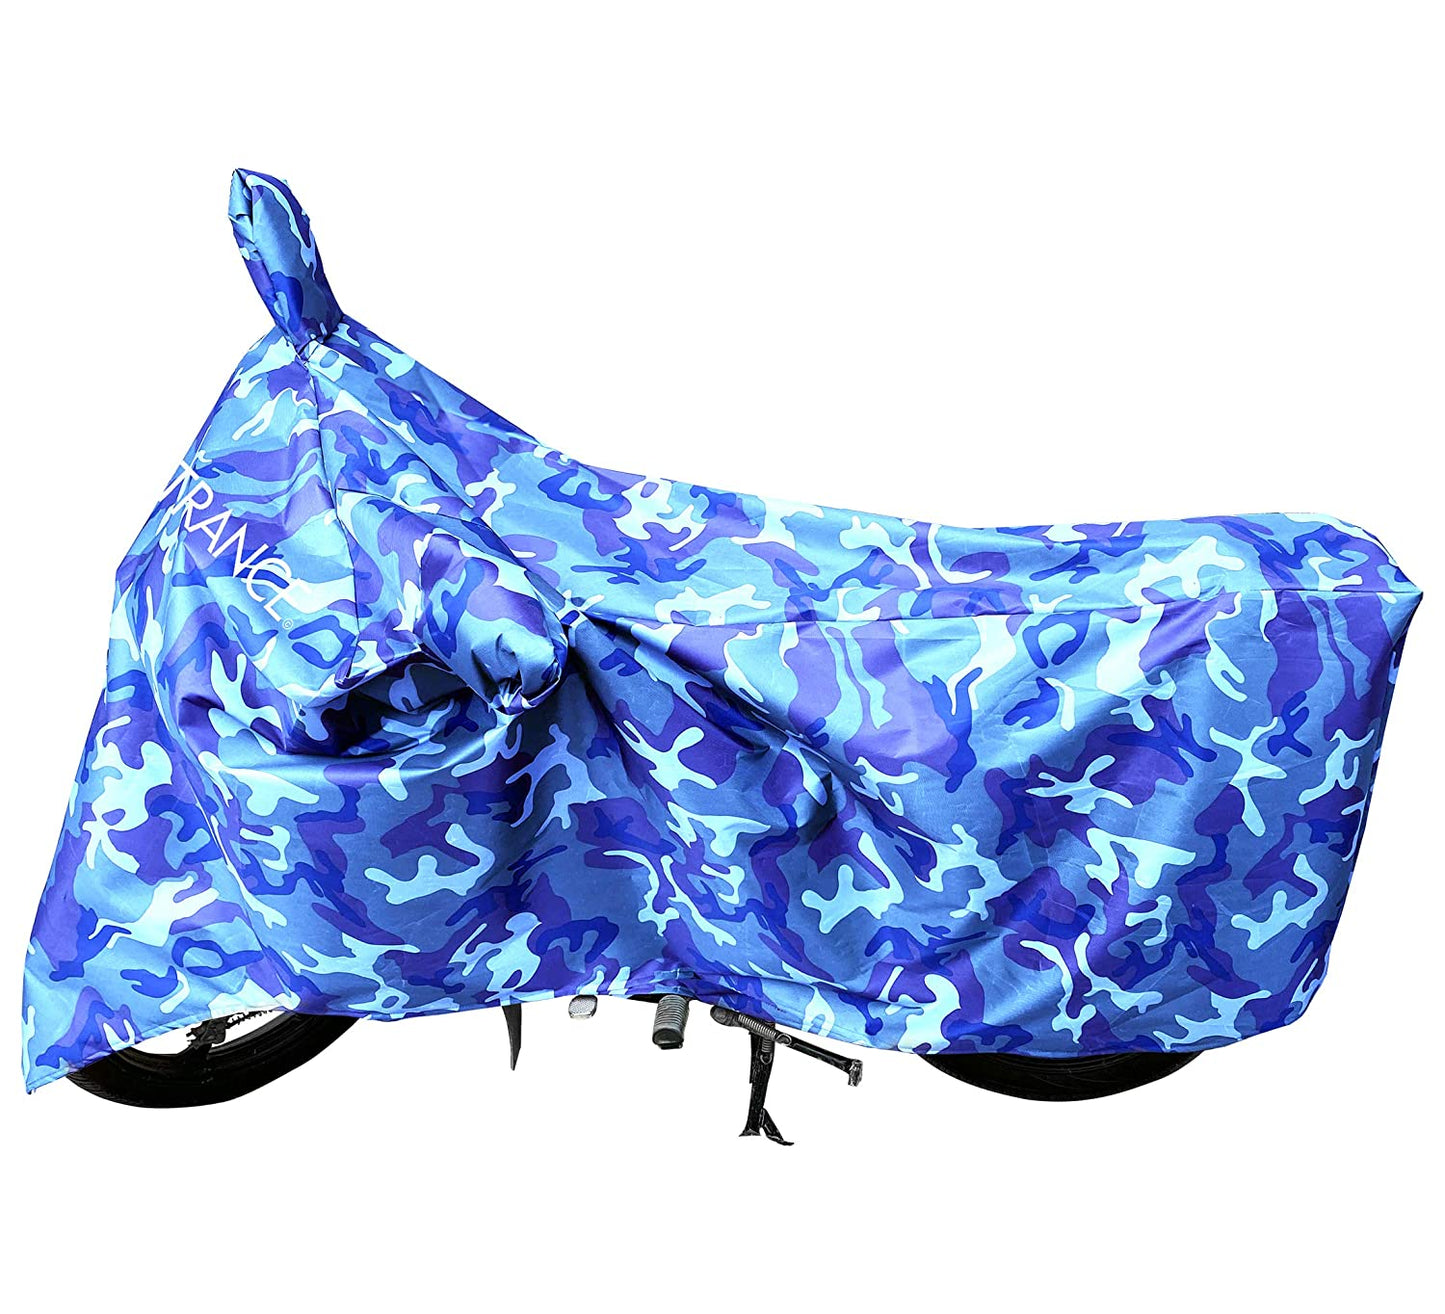 MotoTrance Jungle Bike Body Covers For Suzuki SlingShot Plus - Interlock-Stitched Waterproof and Heat Resistant with Mirror Pockets